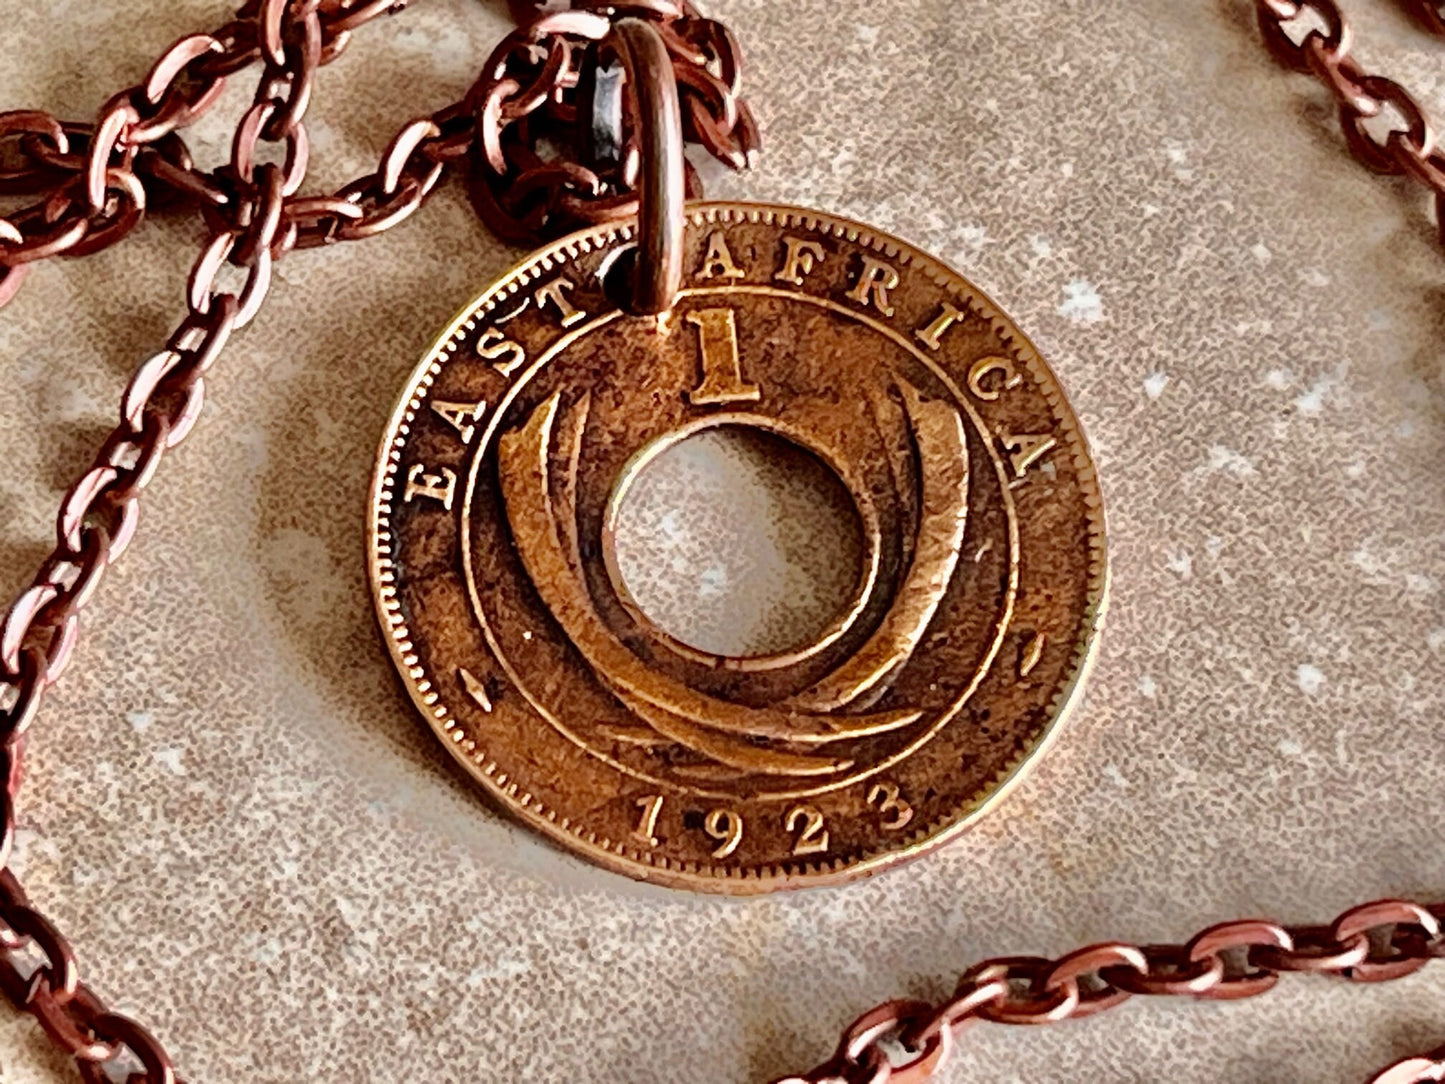 East Africa Coin Pendant 1 Cent African Personal Necklace Old Vintage Handmade Jewelry Gift Friend Charm For Him Her World Coin Collector